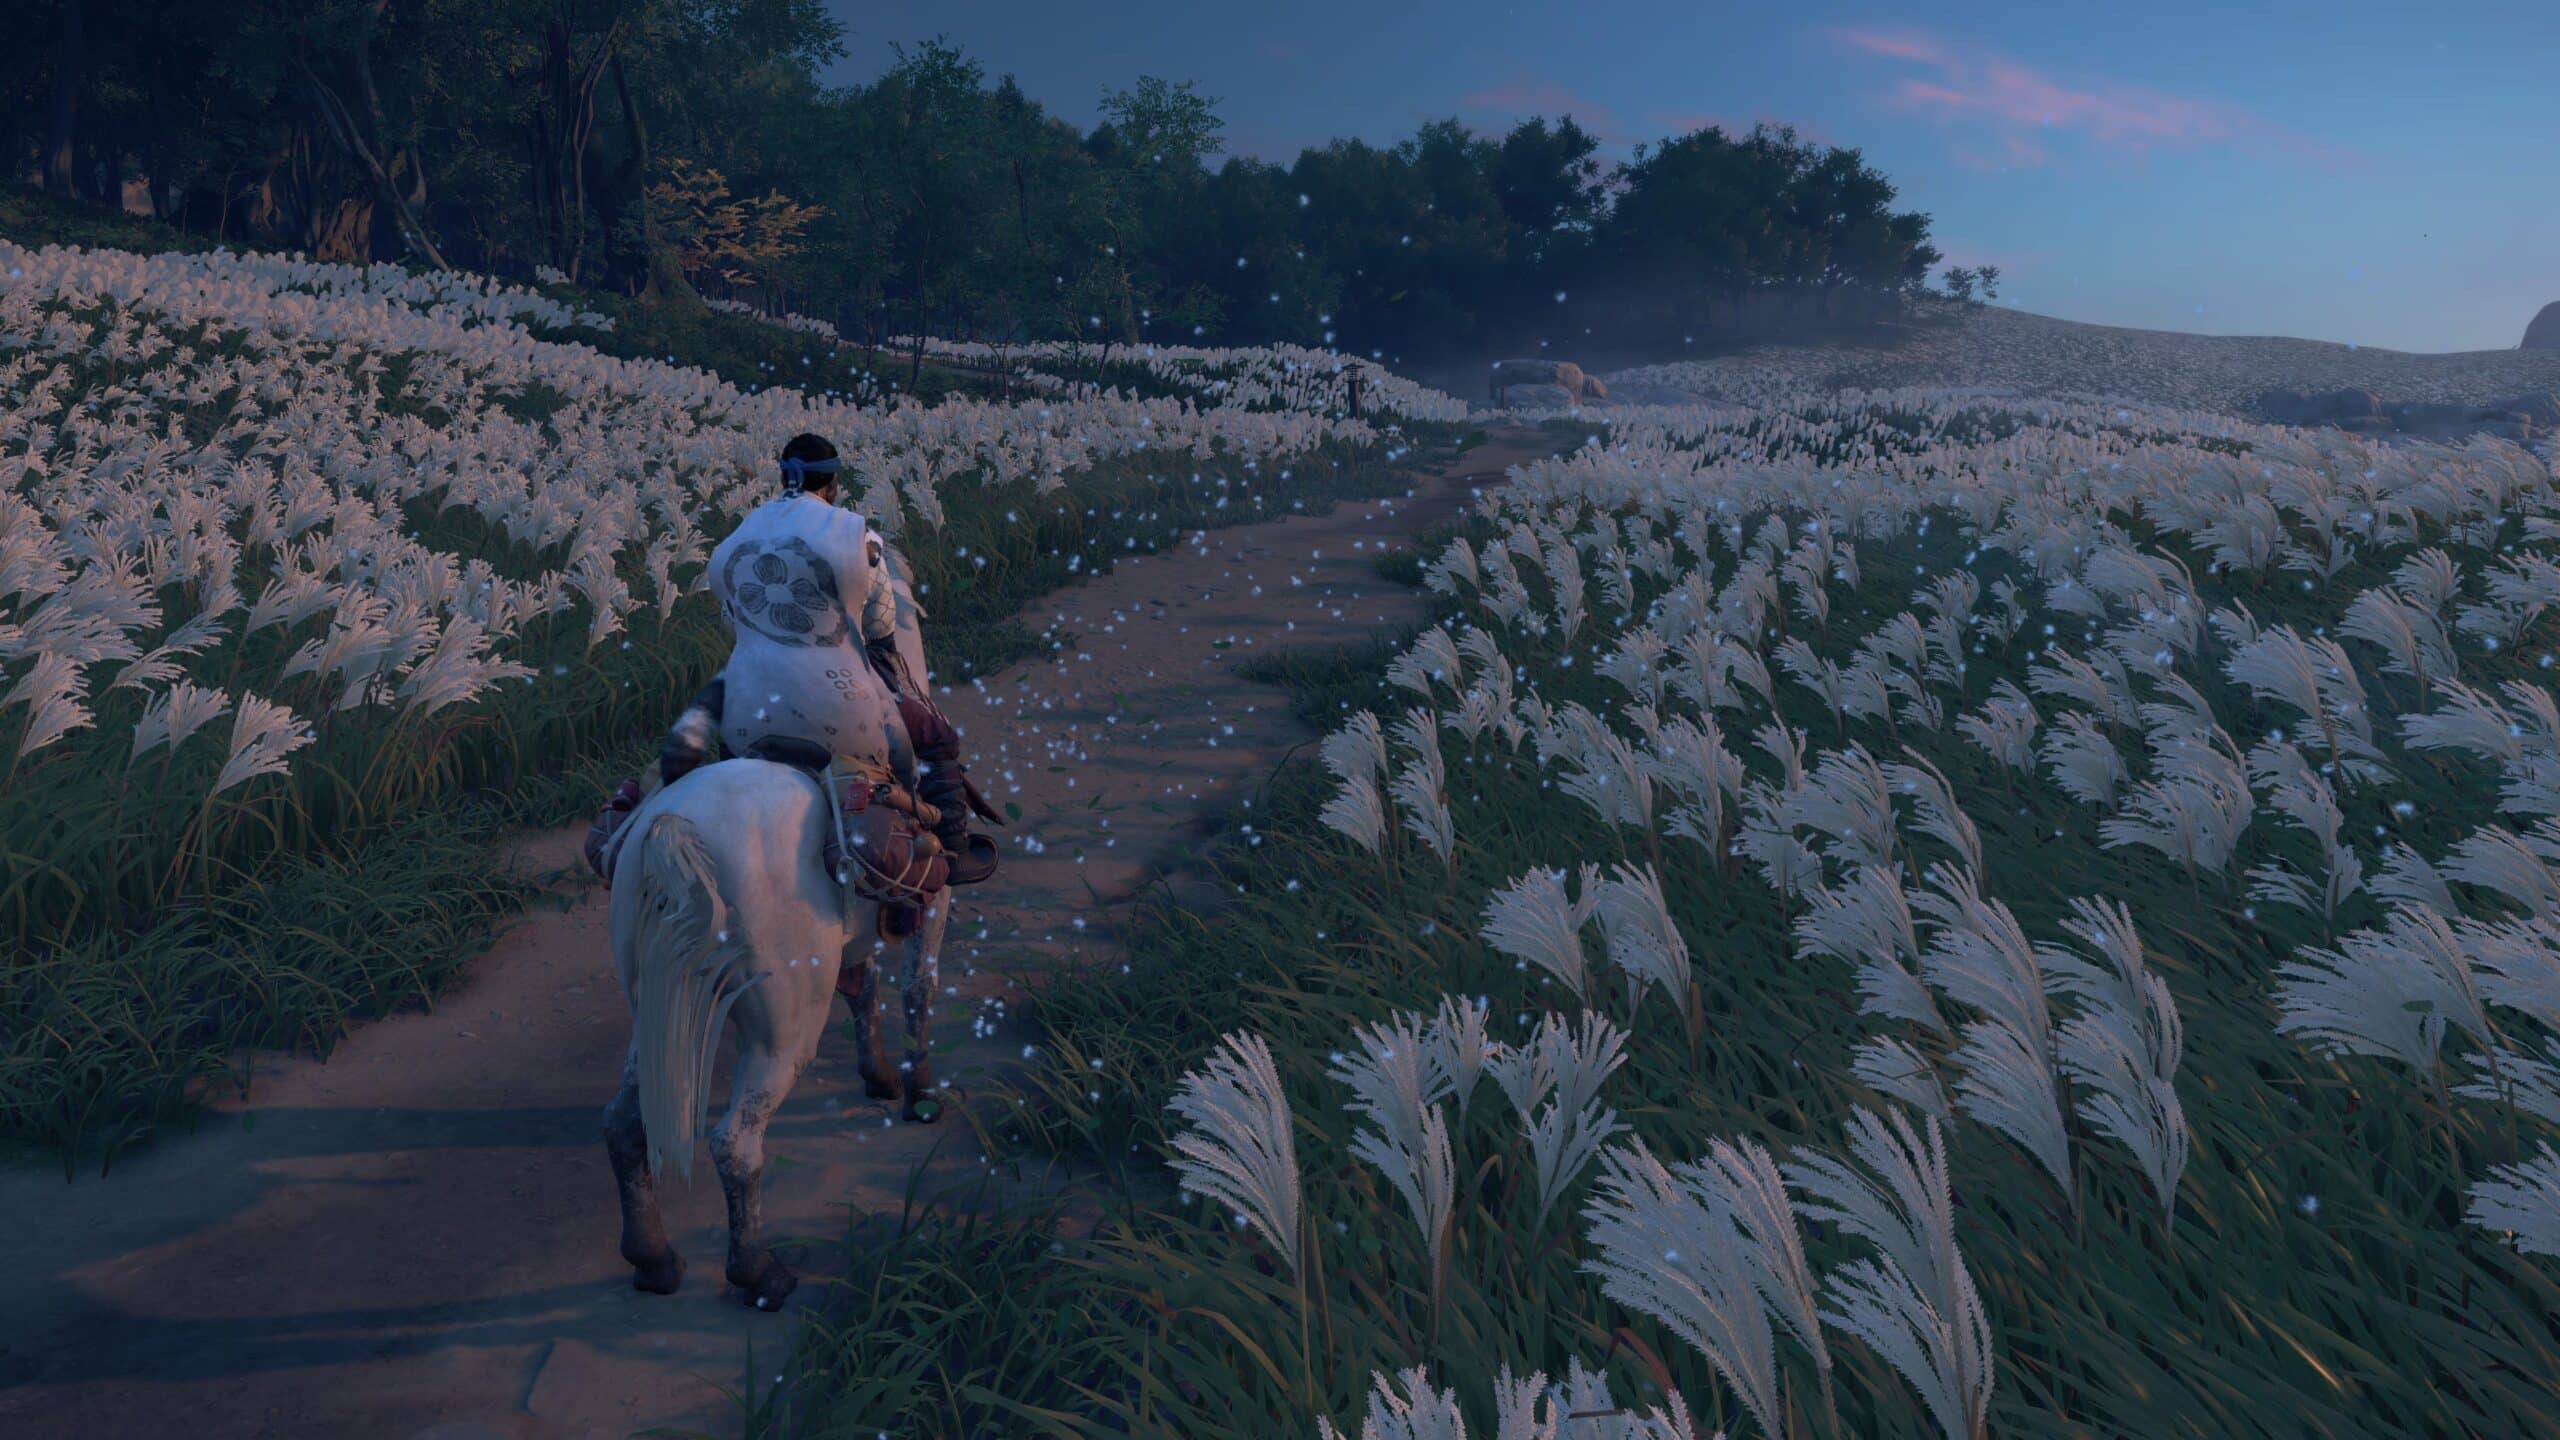 Ghosts of Tsushima Screen Capture of Main Character on a Horse